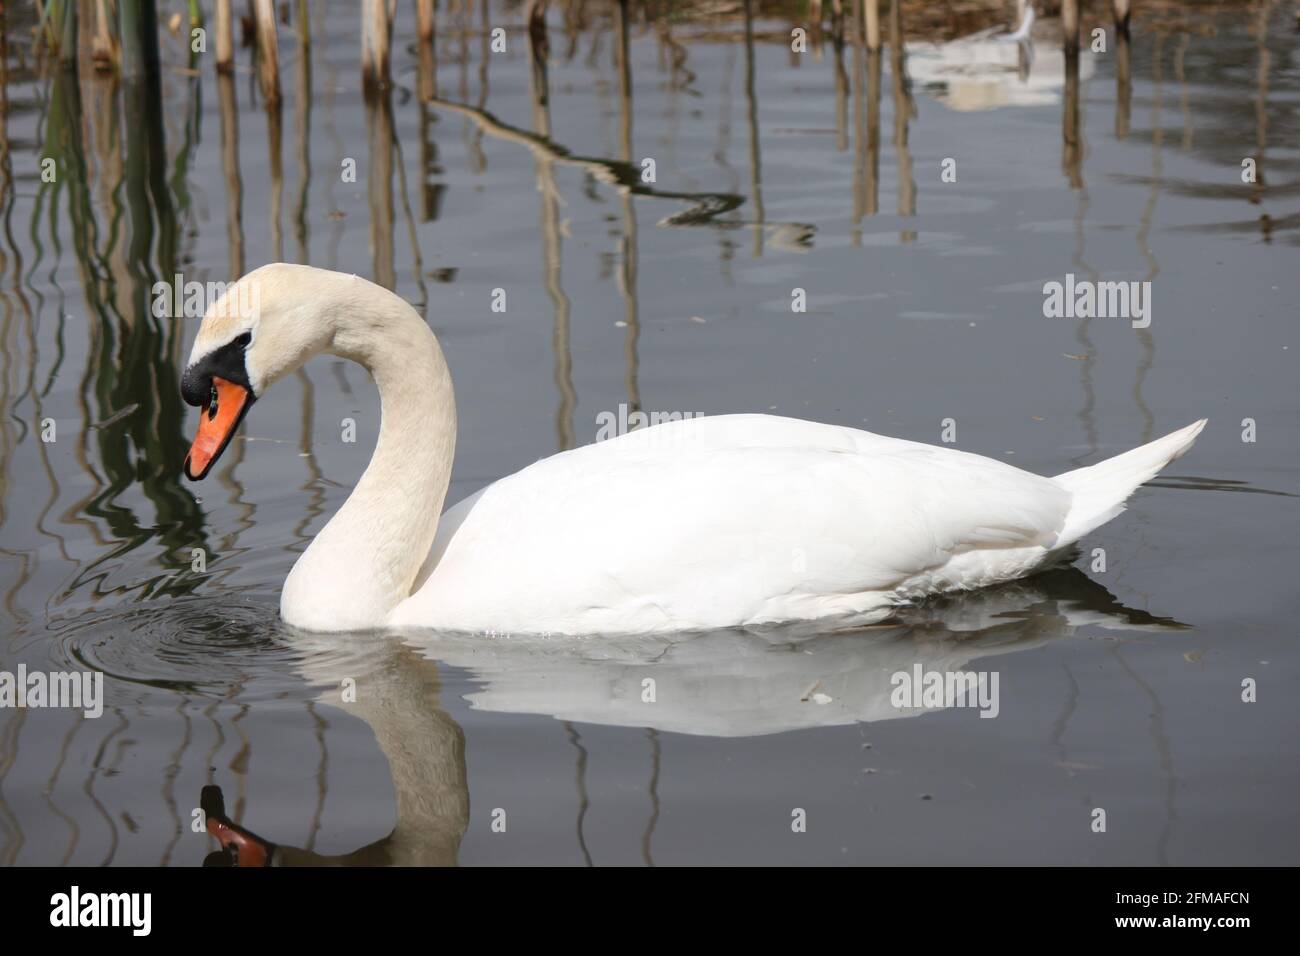 Large majestic white swan captured swimming in a Scottish pond. Swans in their natural habitat, spring waterfowl and wildlife in urban spaces, UK. Stock Photo